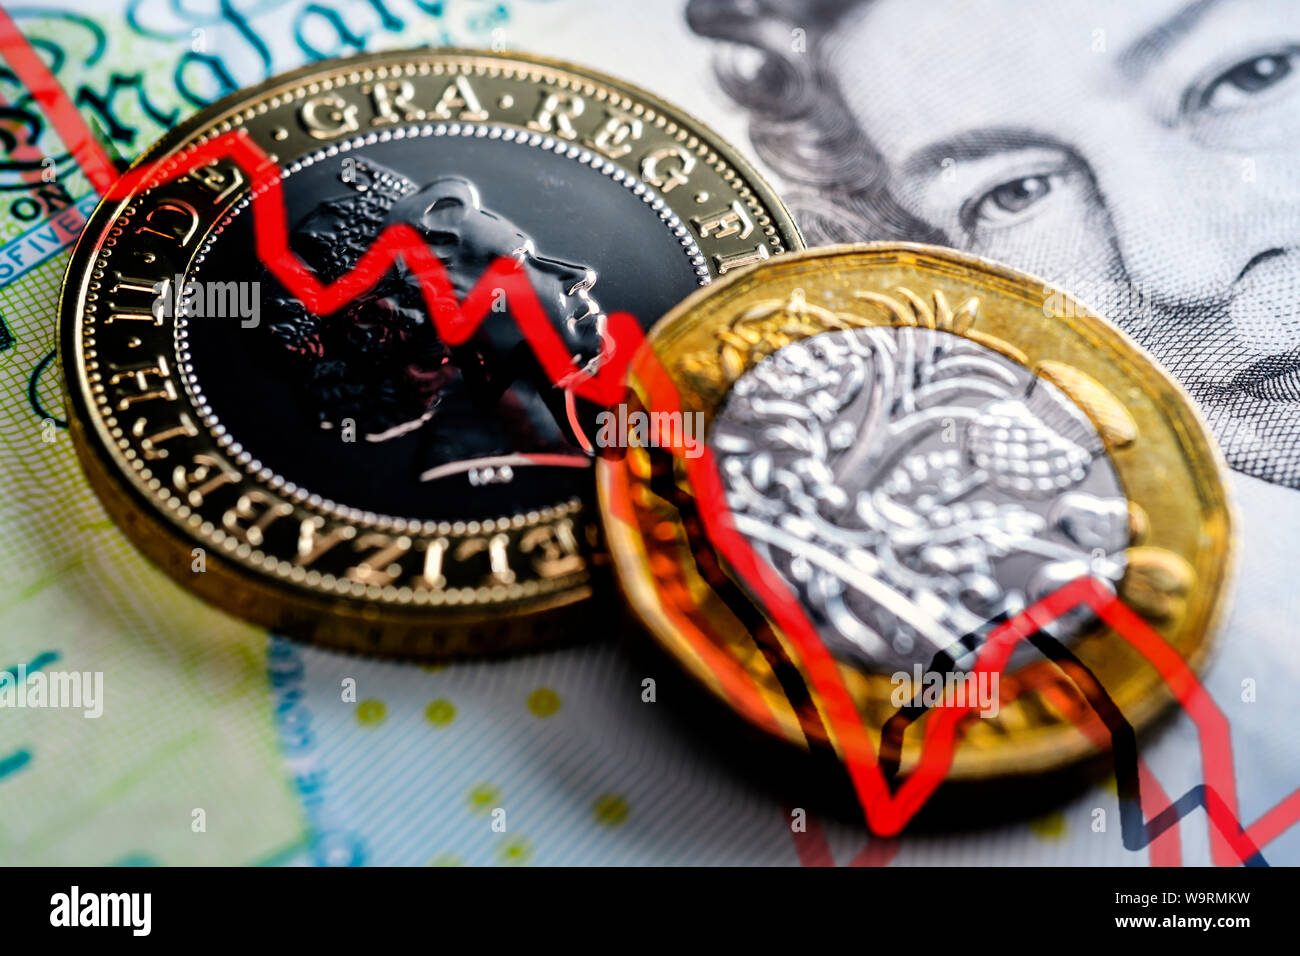 British pound sterling coin and banknotes, falling exchange rate Stock Photo